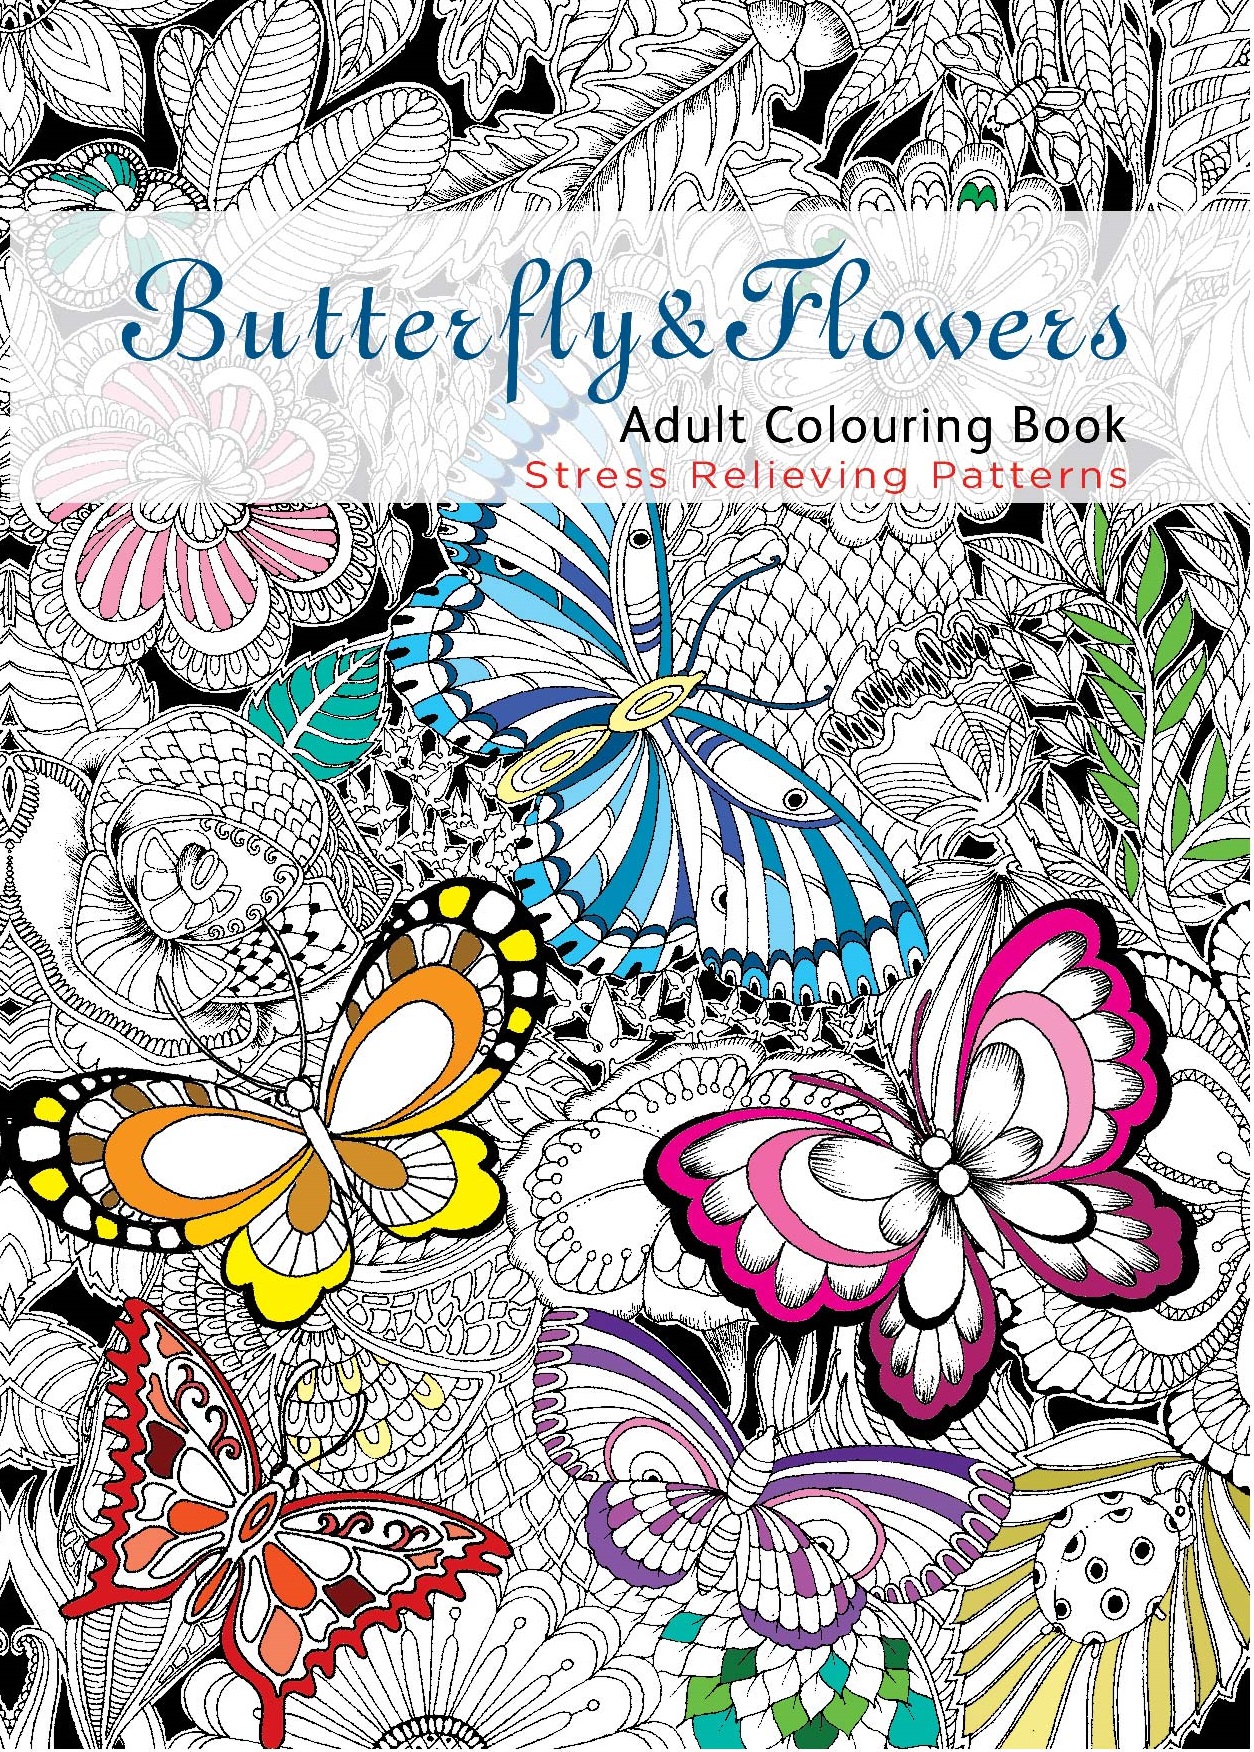 Adult Colouring Book - Butterfly & Flowers